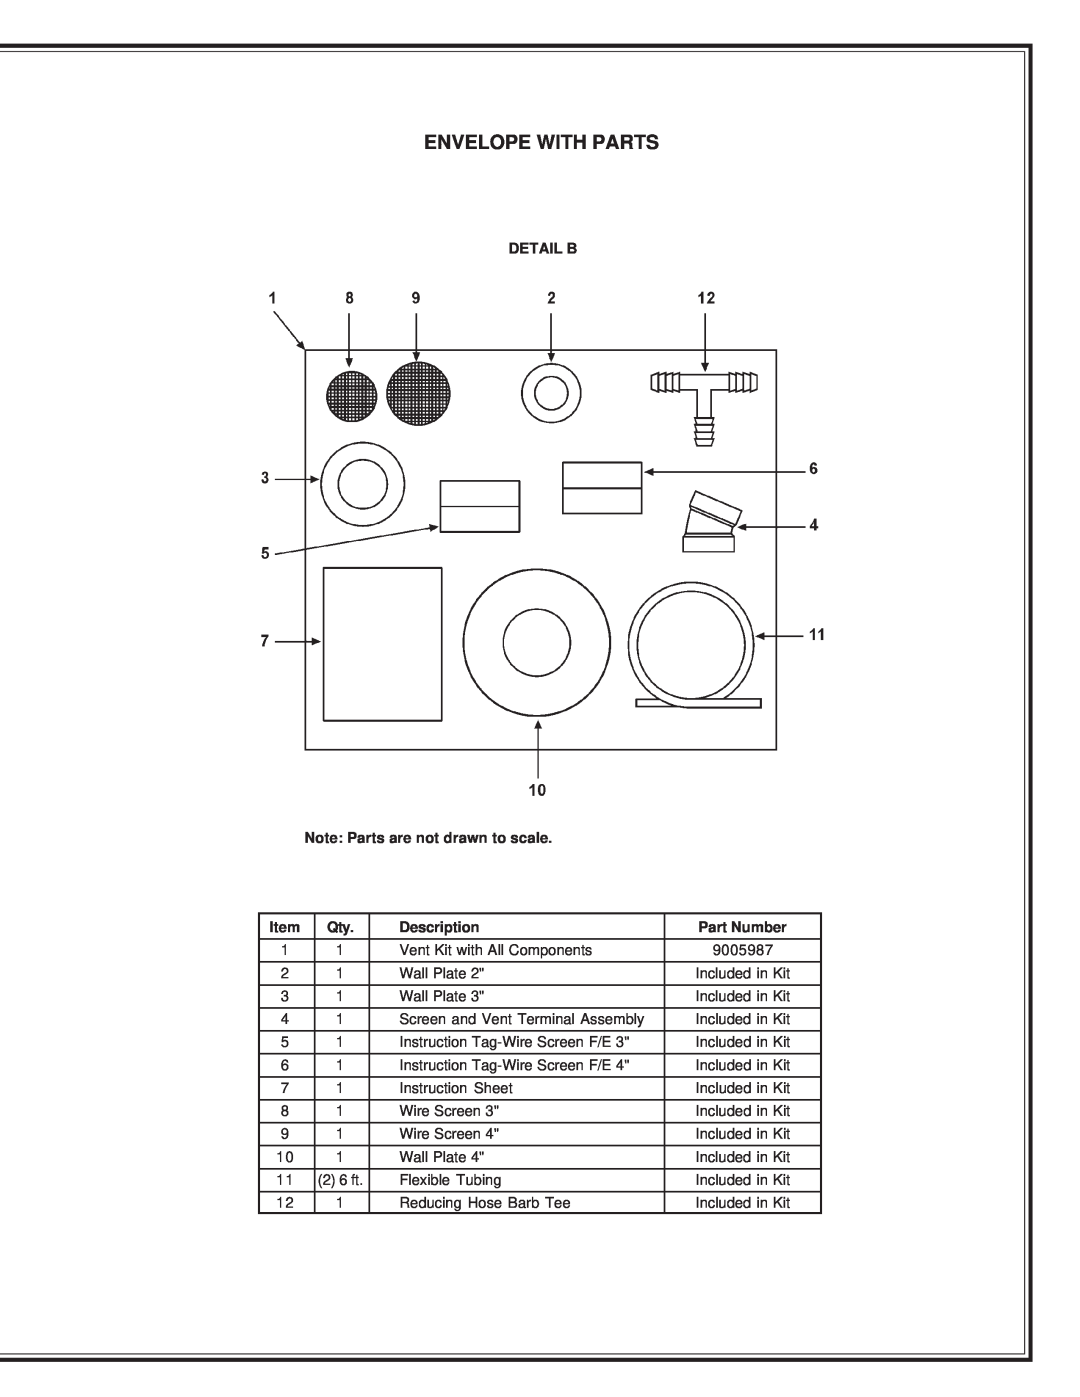 State Industries GP6 50 YTVIT Envelope With Parts, DETAIL B Note: Parts are not drawn to scale, Description, Part Number 